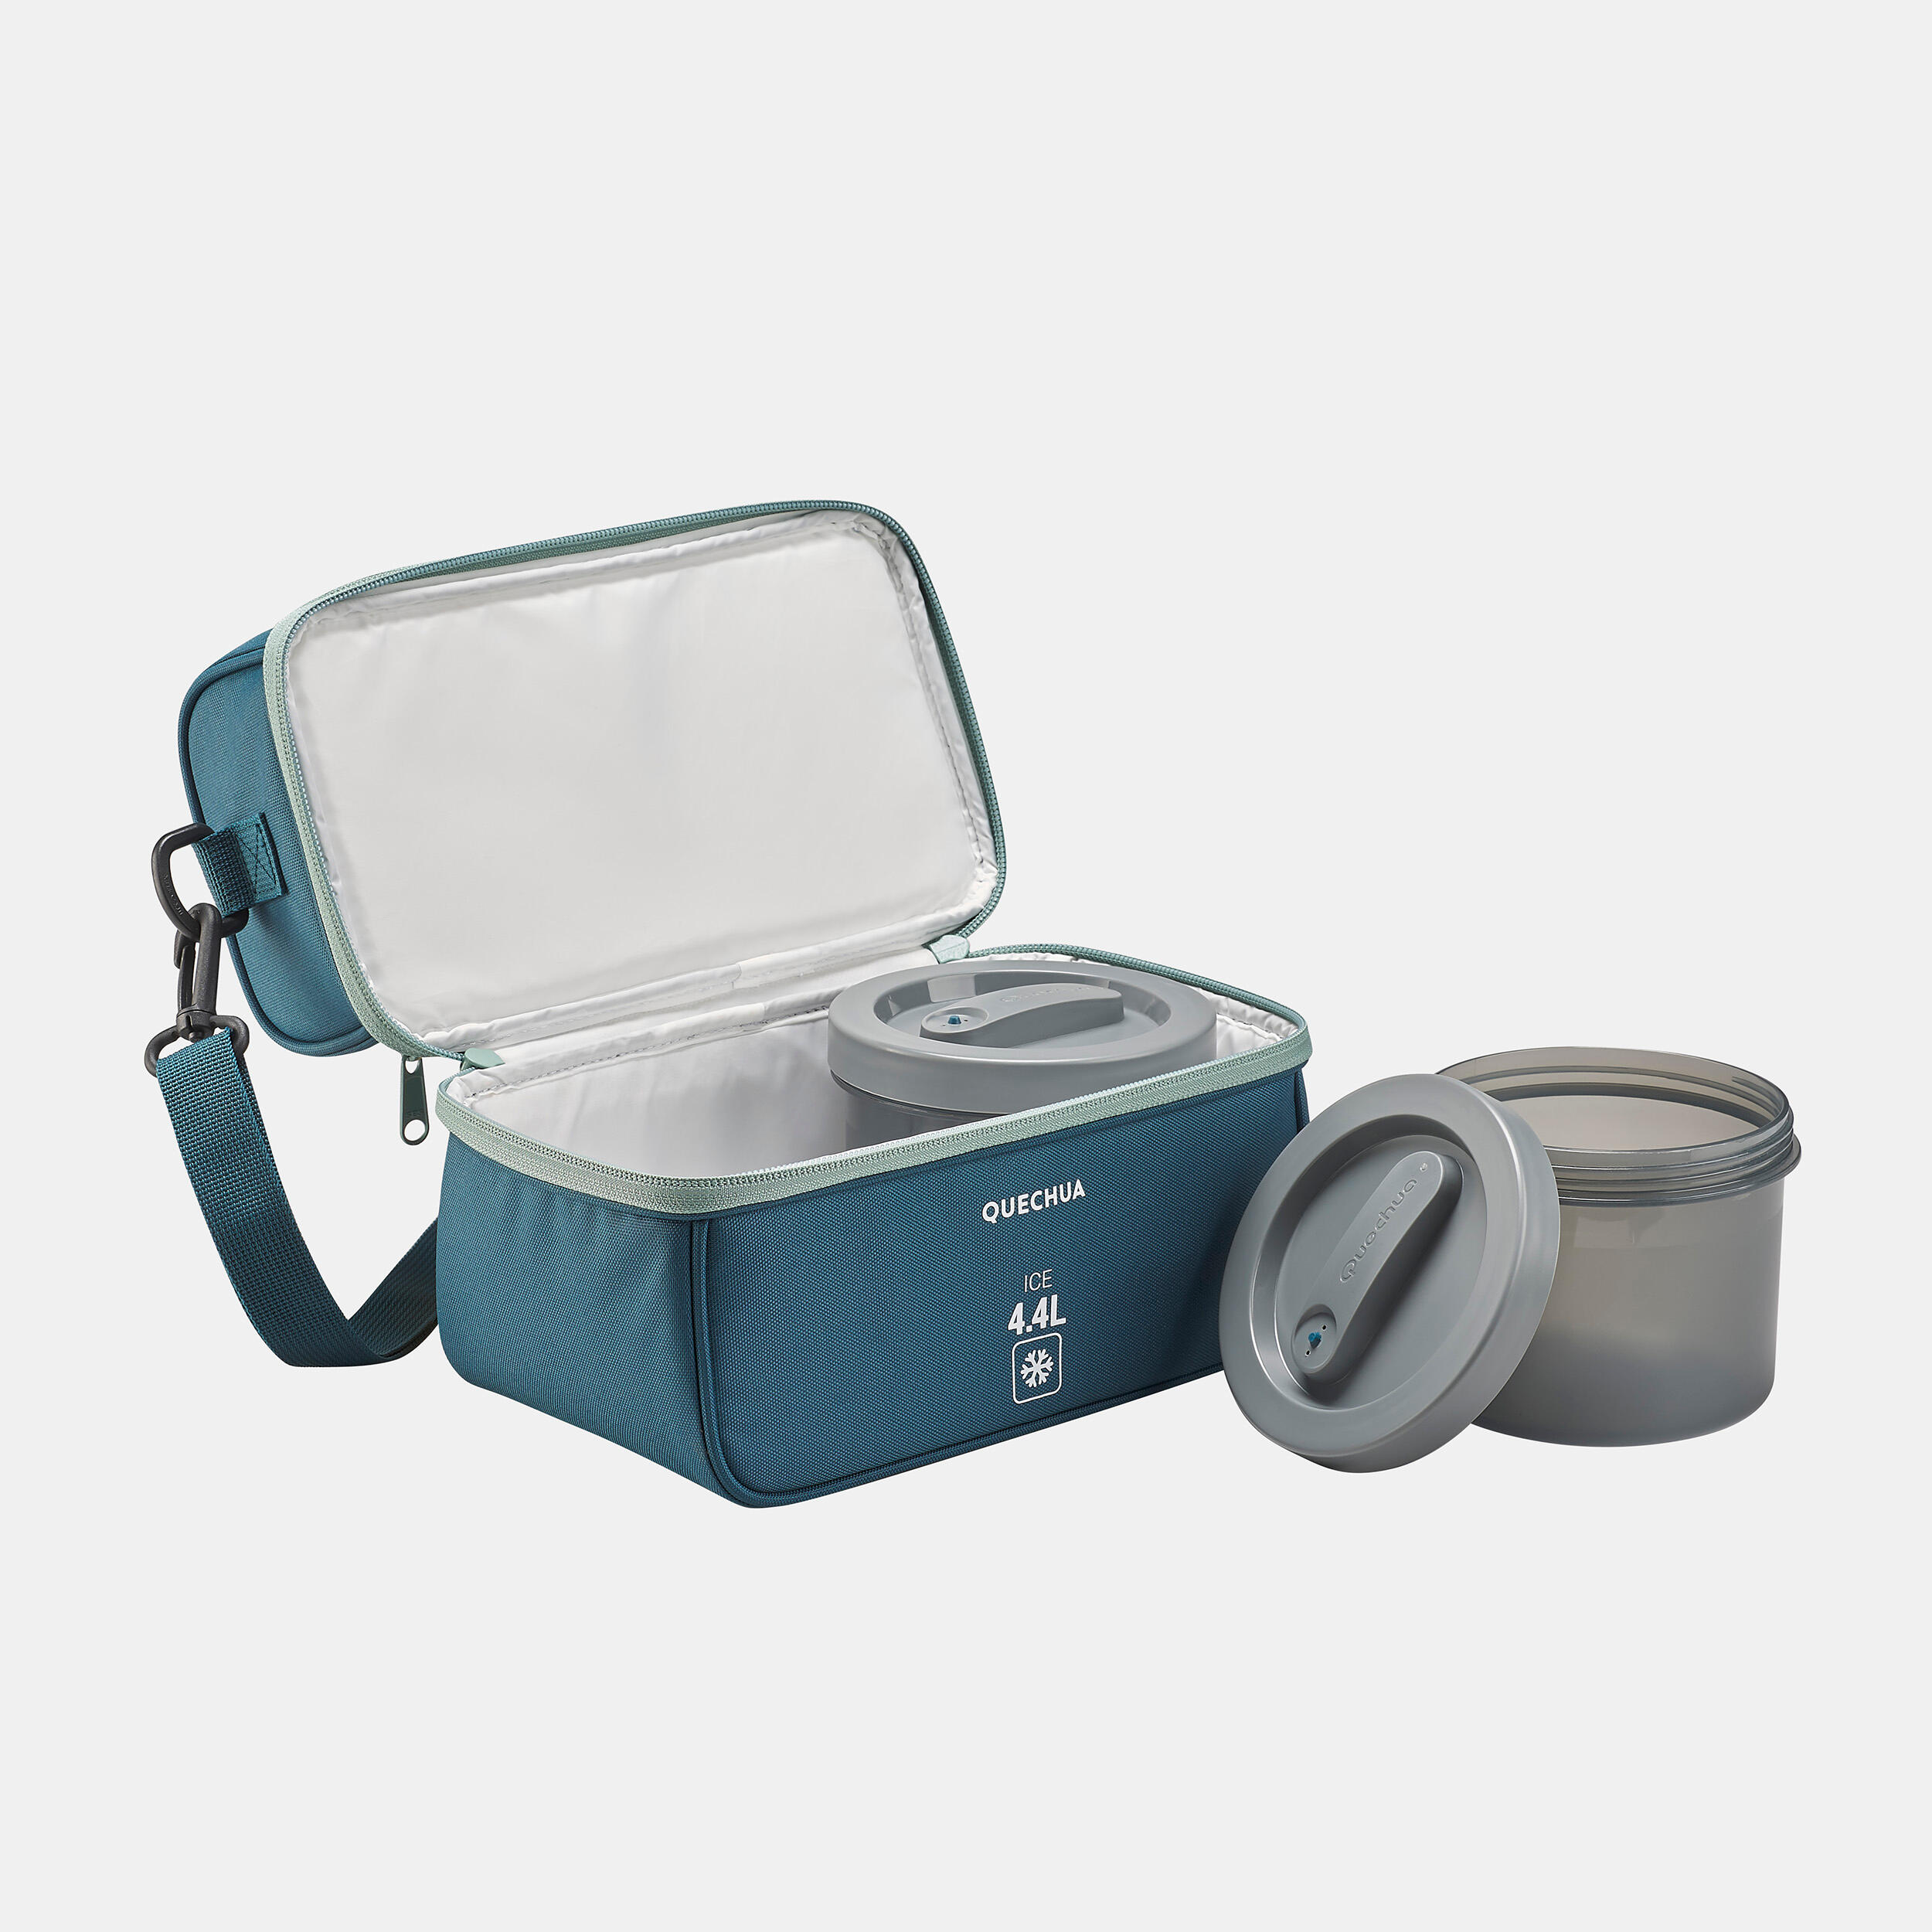 Insulated lunch box 100 - 4.4 Litres - 2 food storage boxes included 2/7